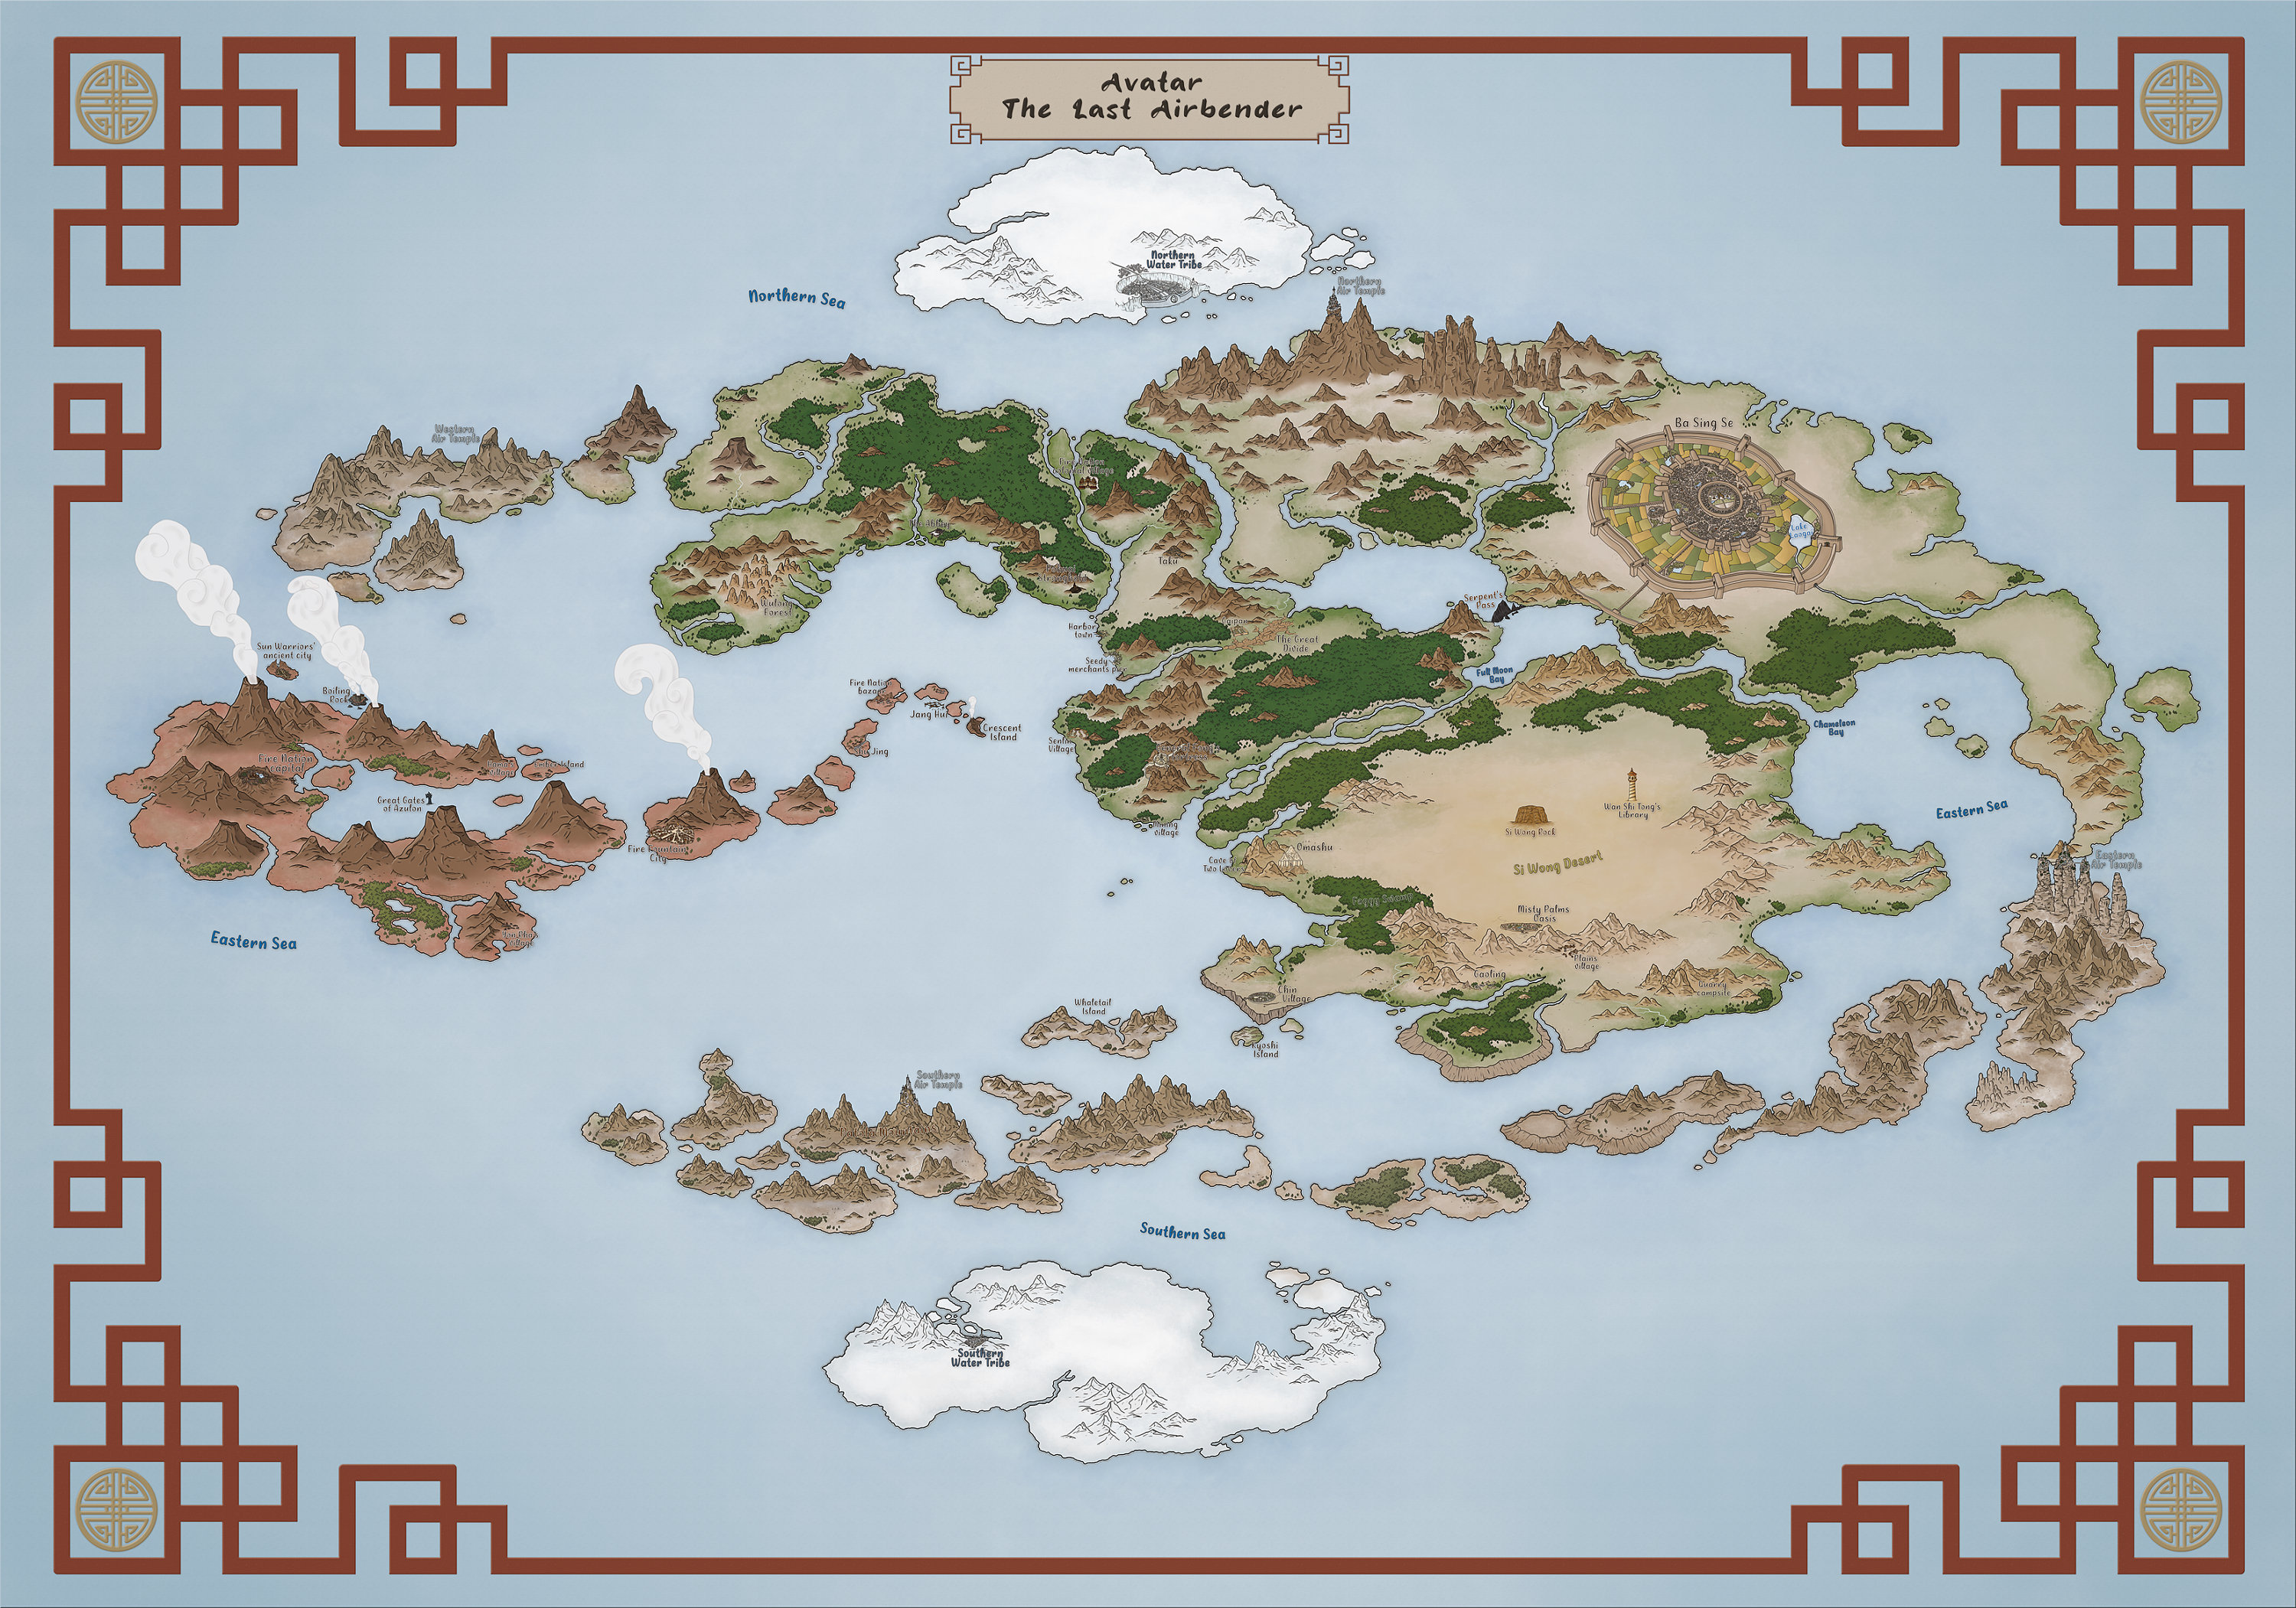 Avatar The Last Airbender Book 3 Travel Map Dnsoperf